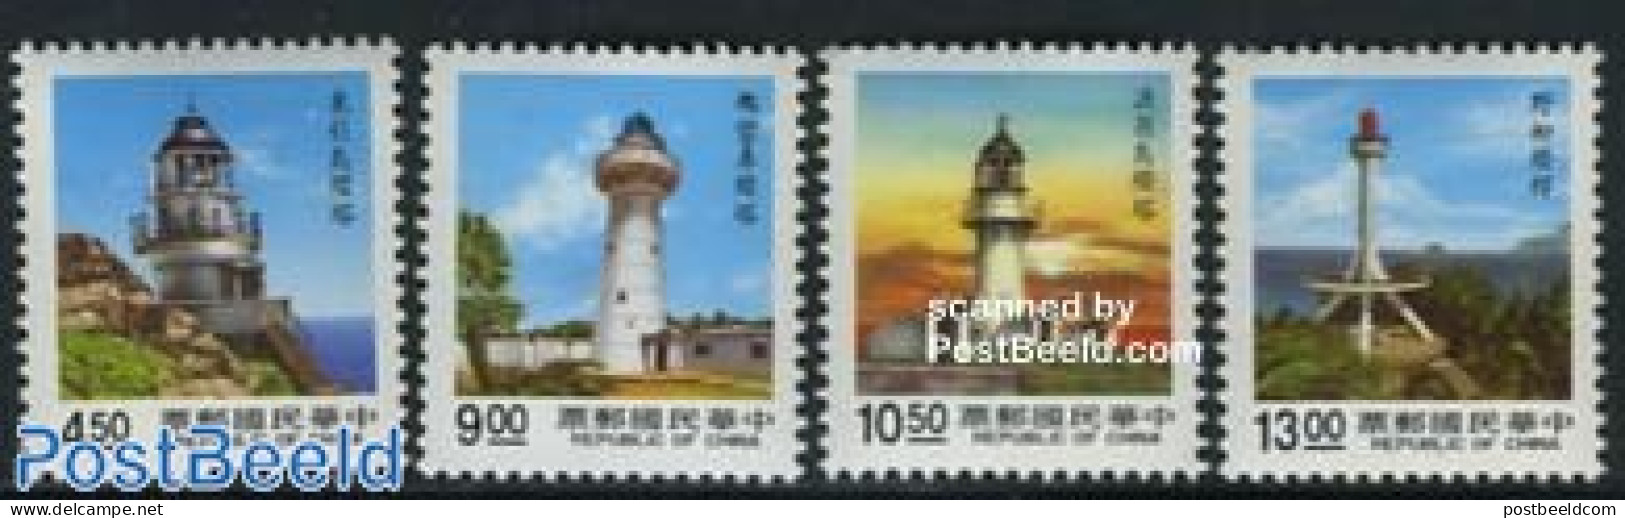 Taiwan 1989 Lighthouses 4v, Mint NH, Various - Lighthouses & Safety At Sea - Vuurtorens